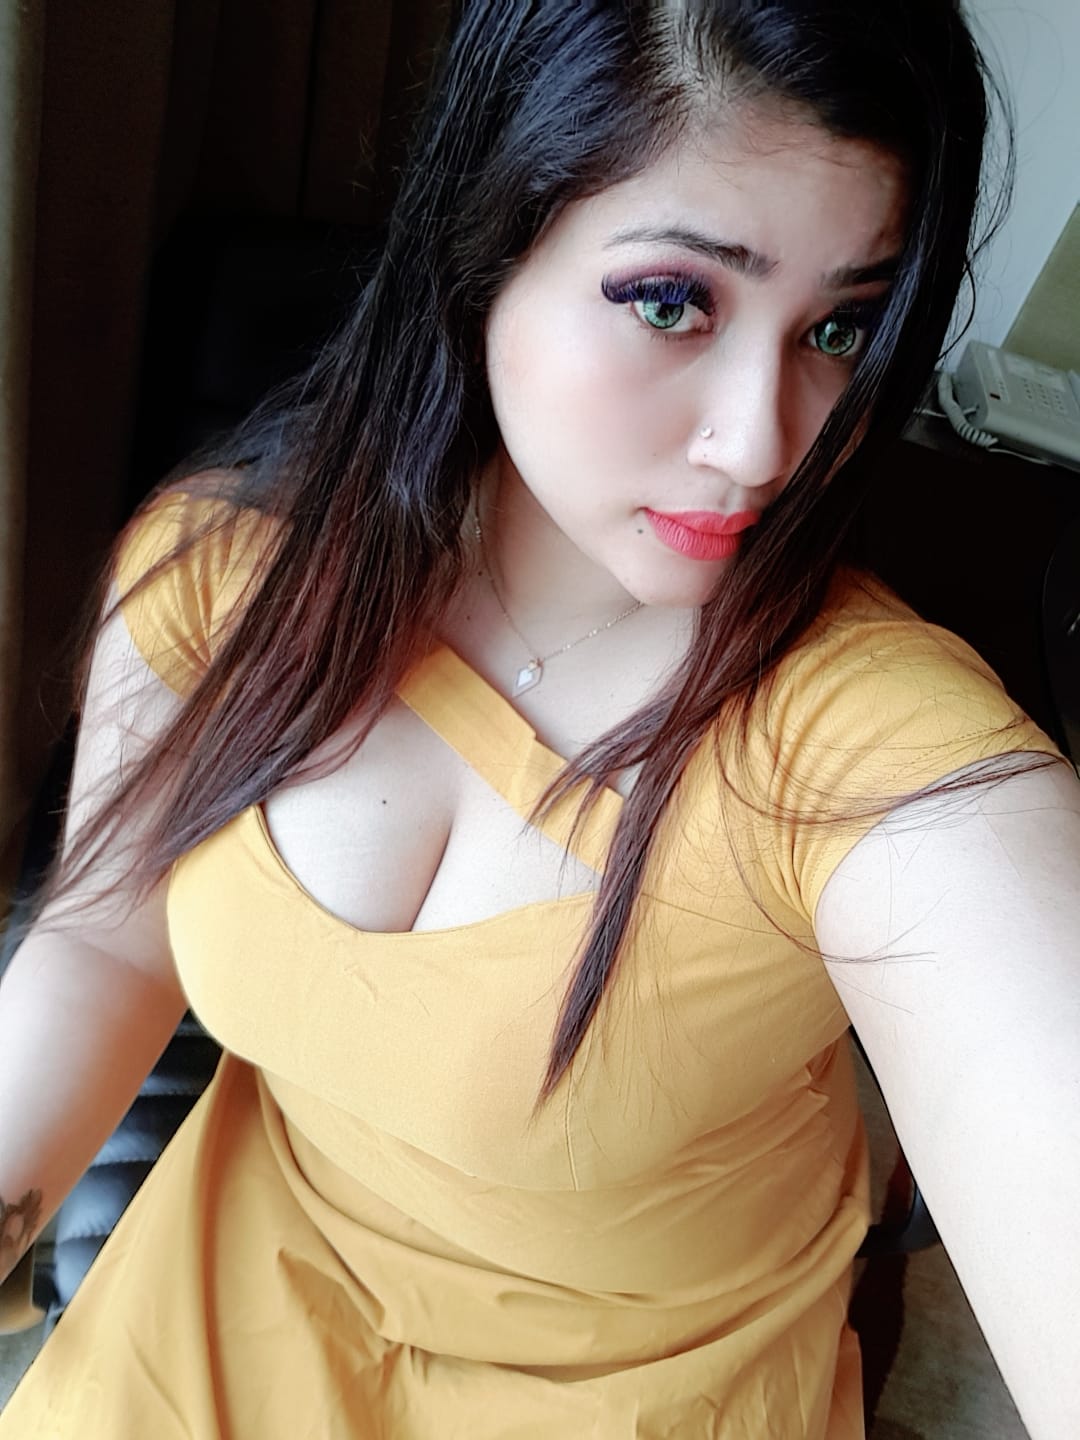 Book Delhi Call Girls, Experience The Best 5* Service ☎️ Book 9899869190 Now! ❤️